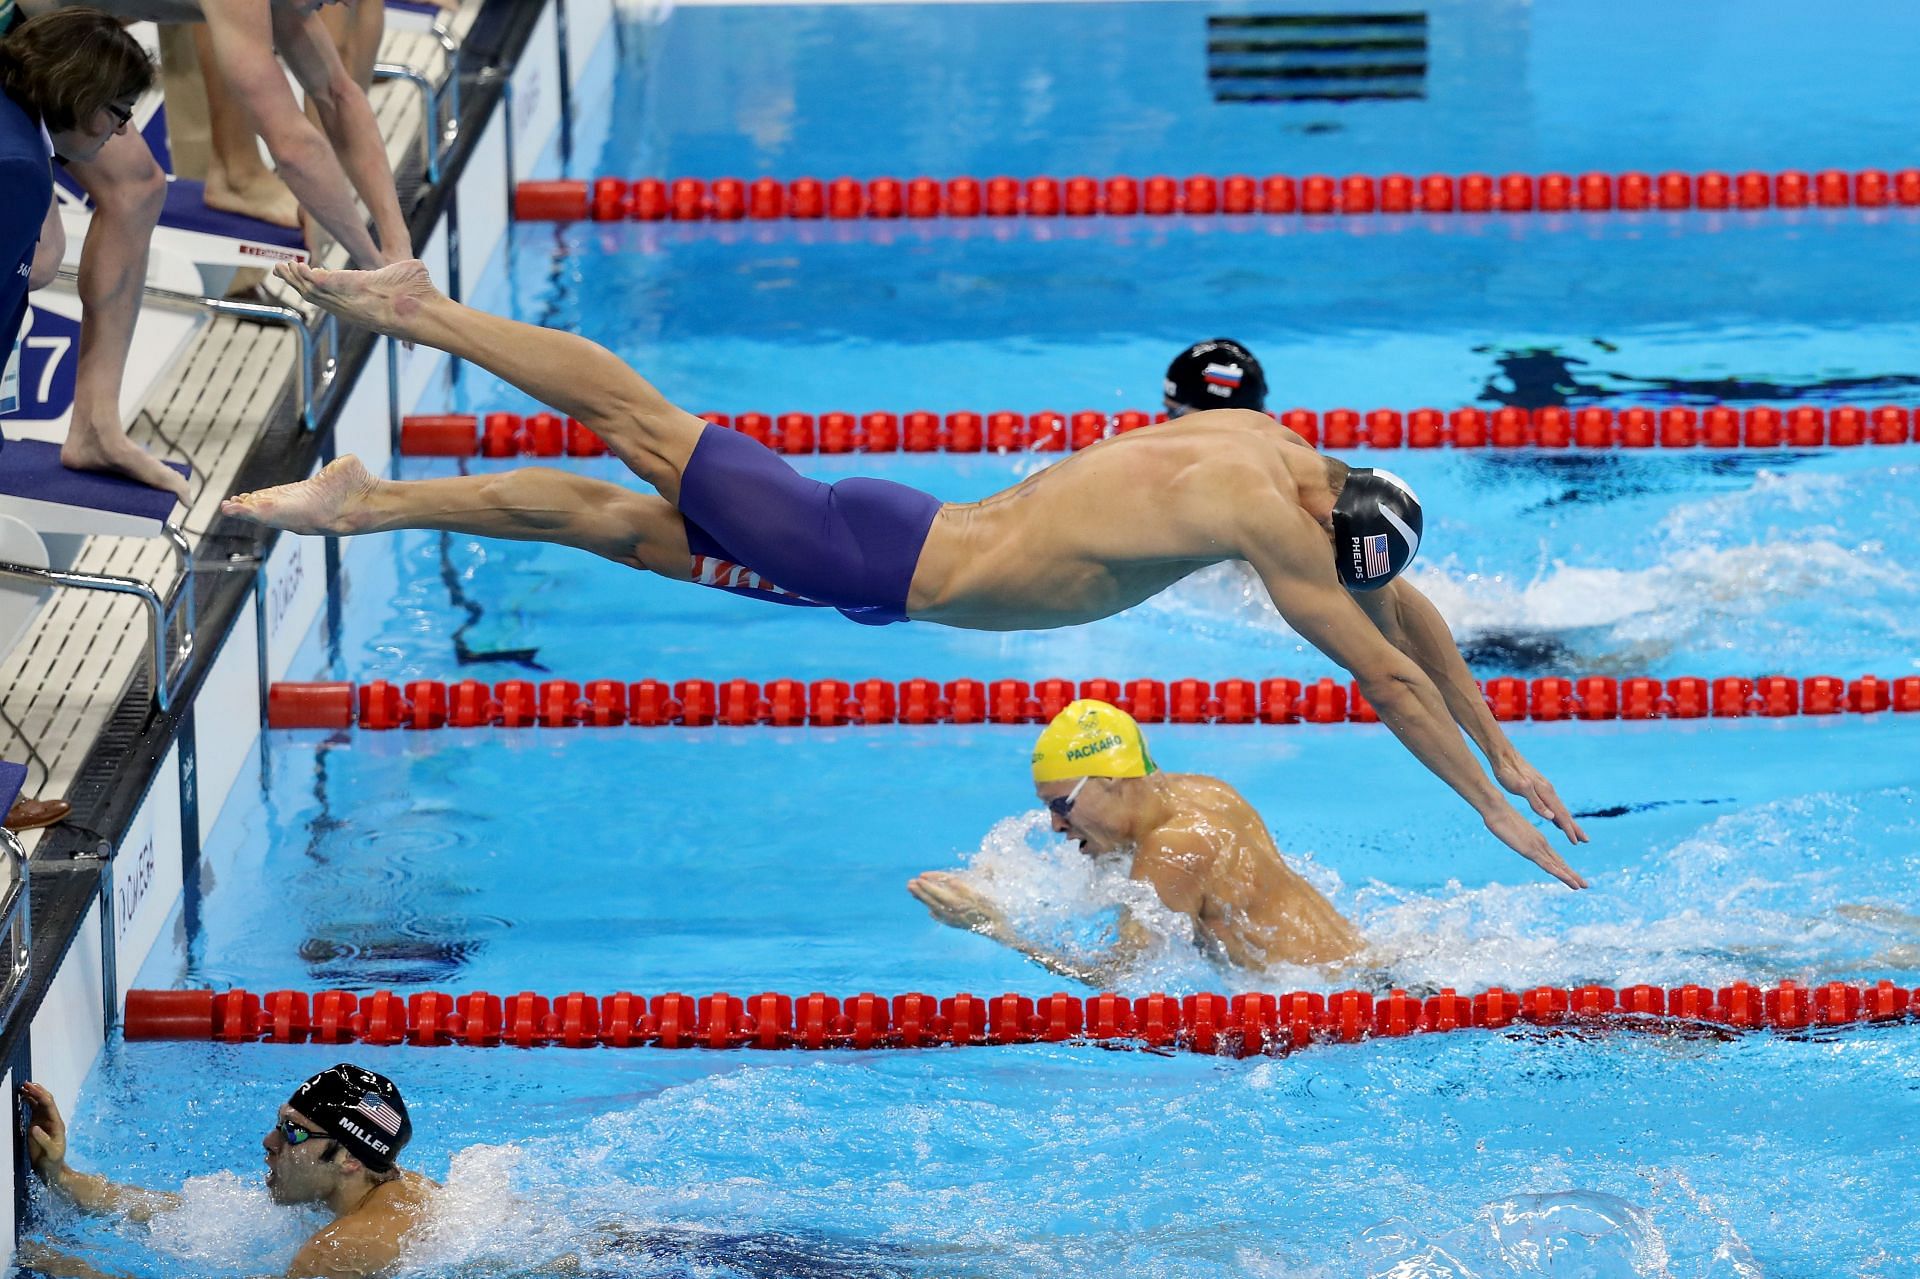 Action from a swimming event on Day 8 of the 2016 Rio Olympics (Image courtesy: Getty)